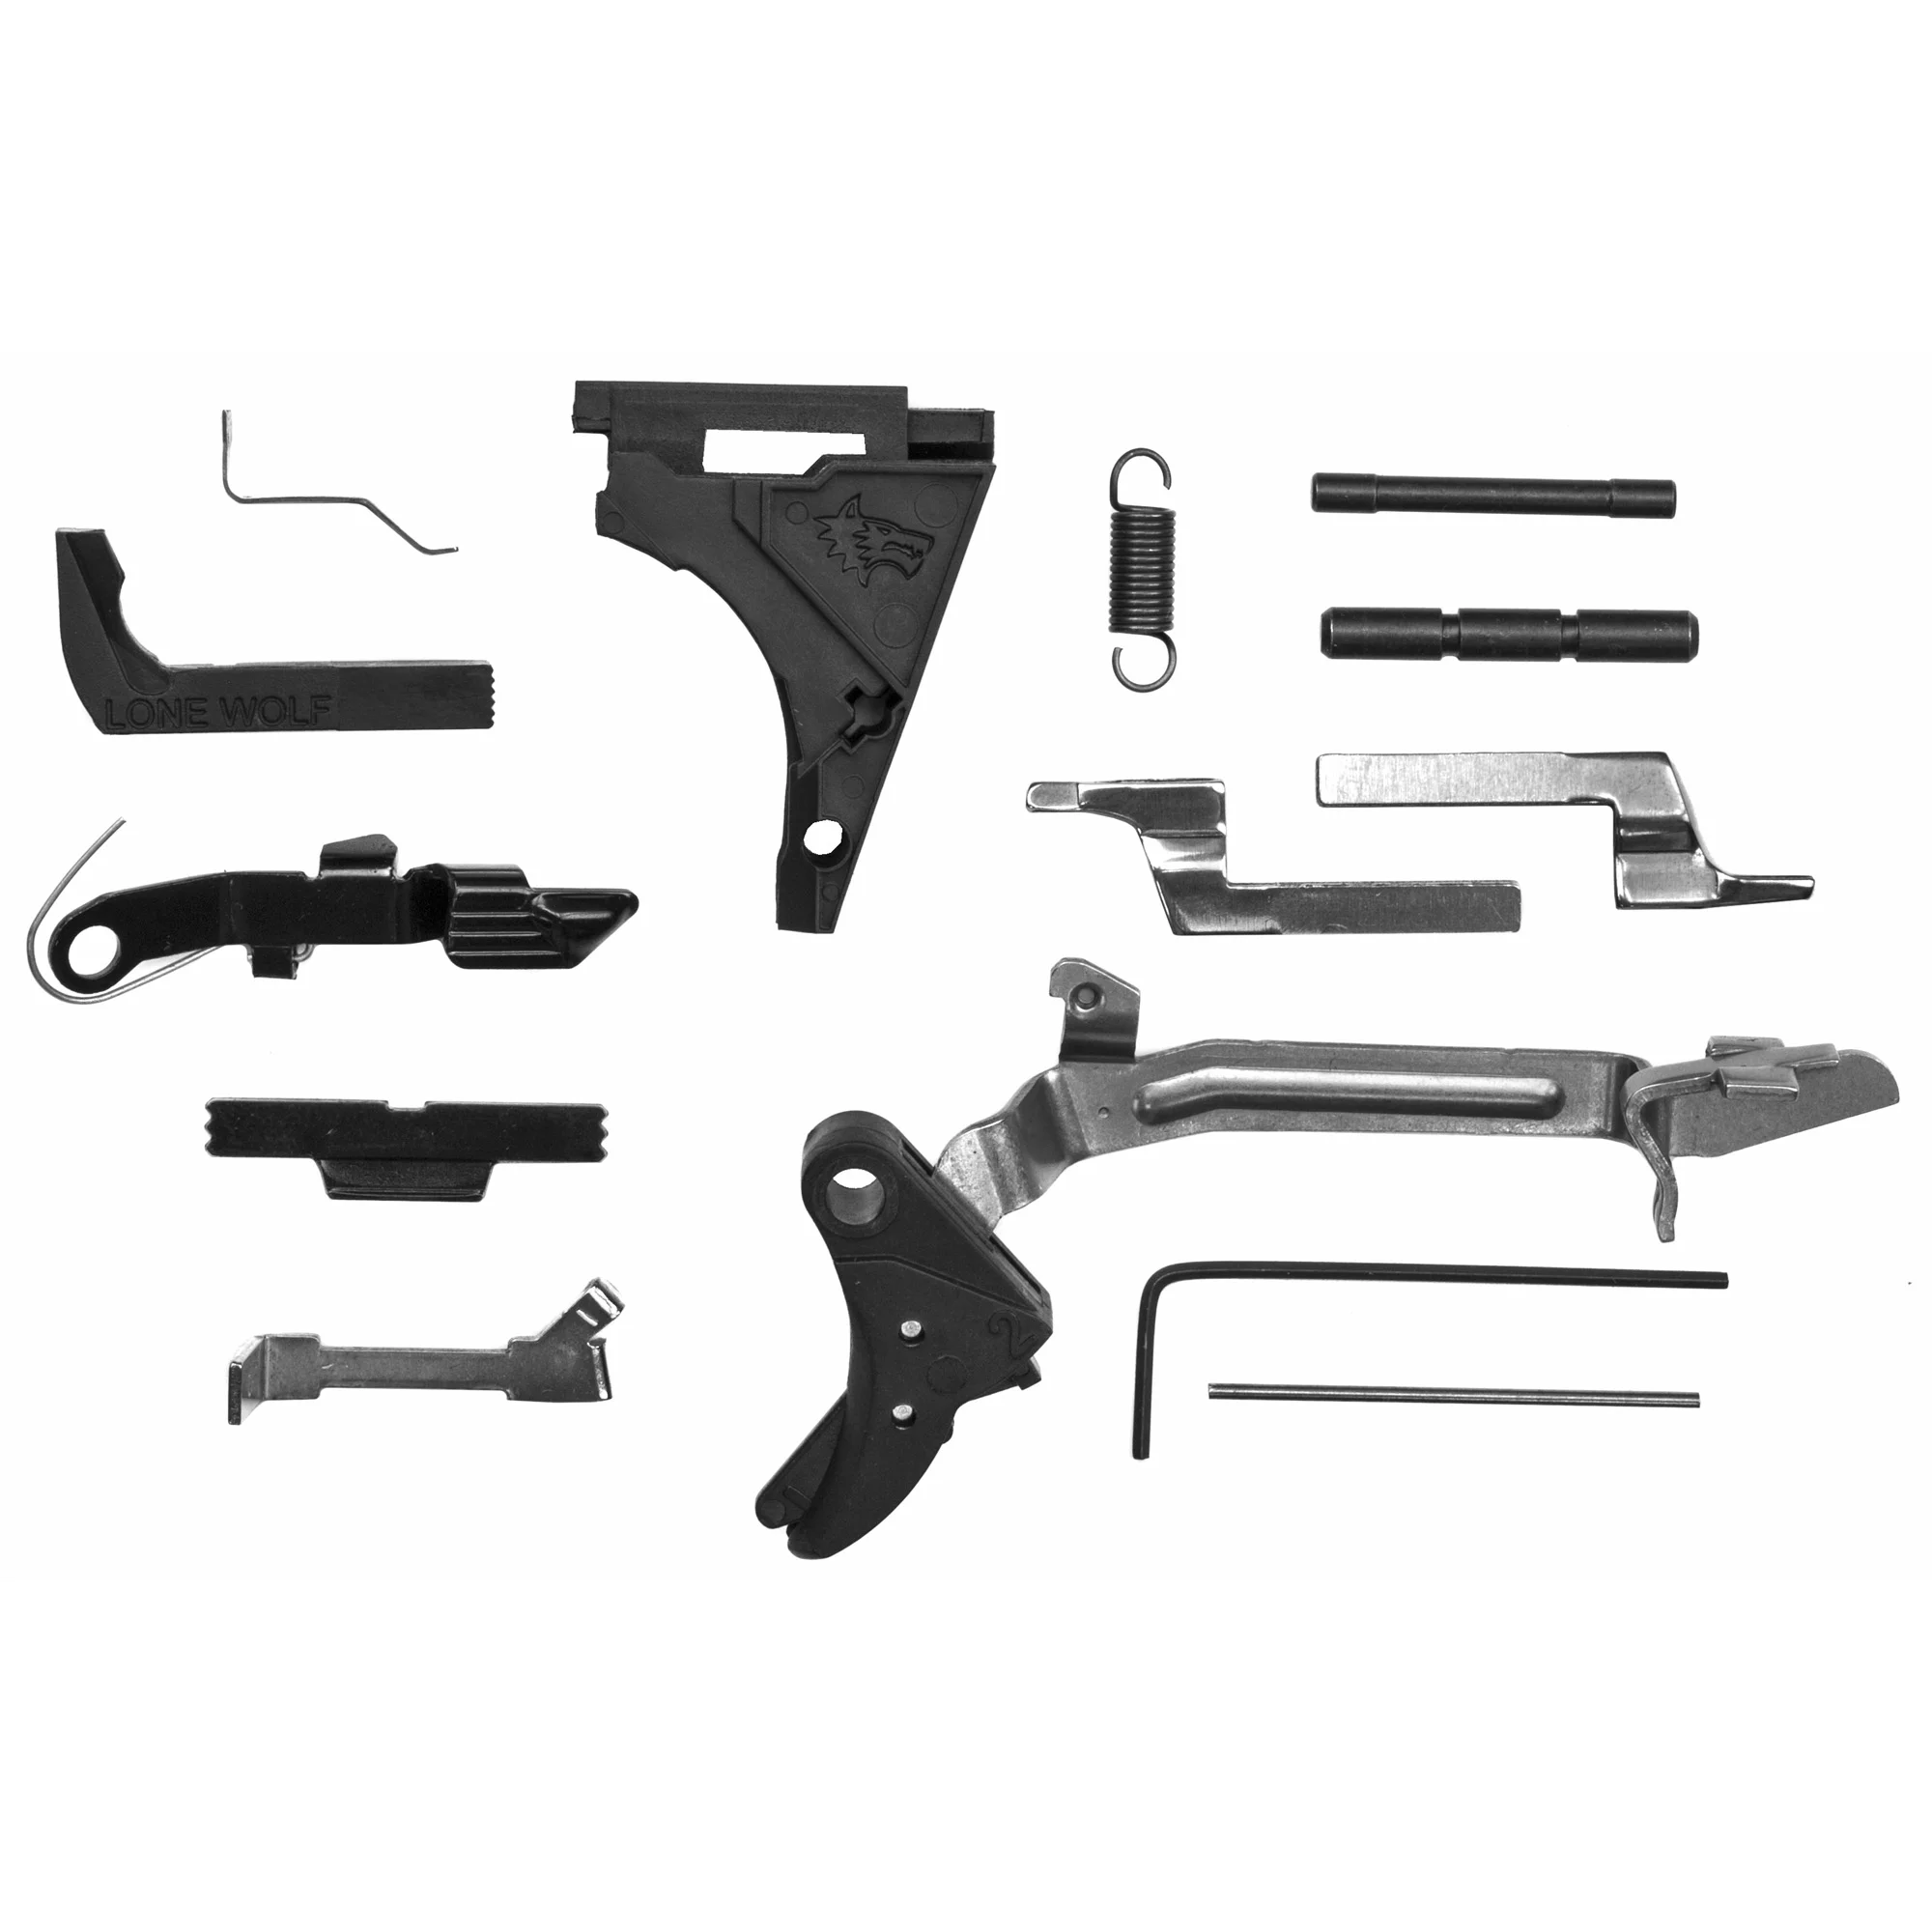 Polymer 80 Lower Parts Kit w/ Trigger